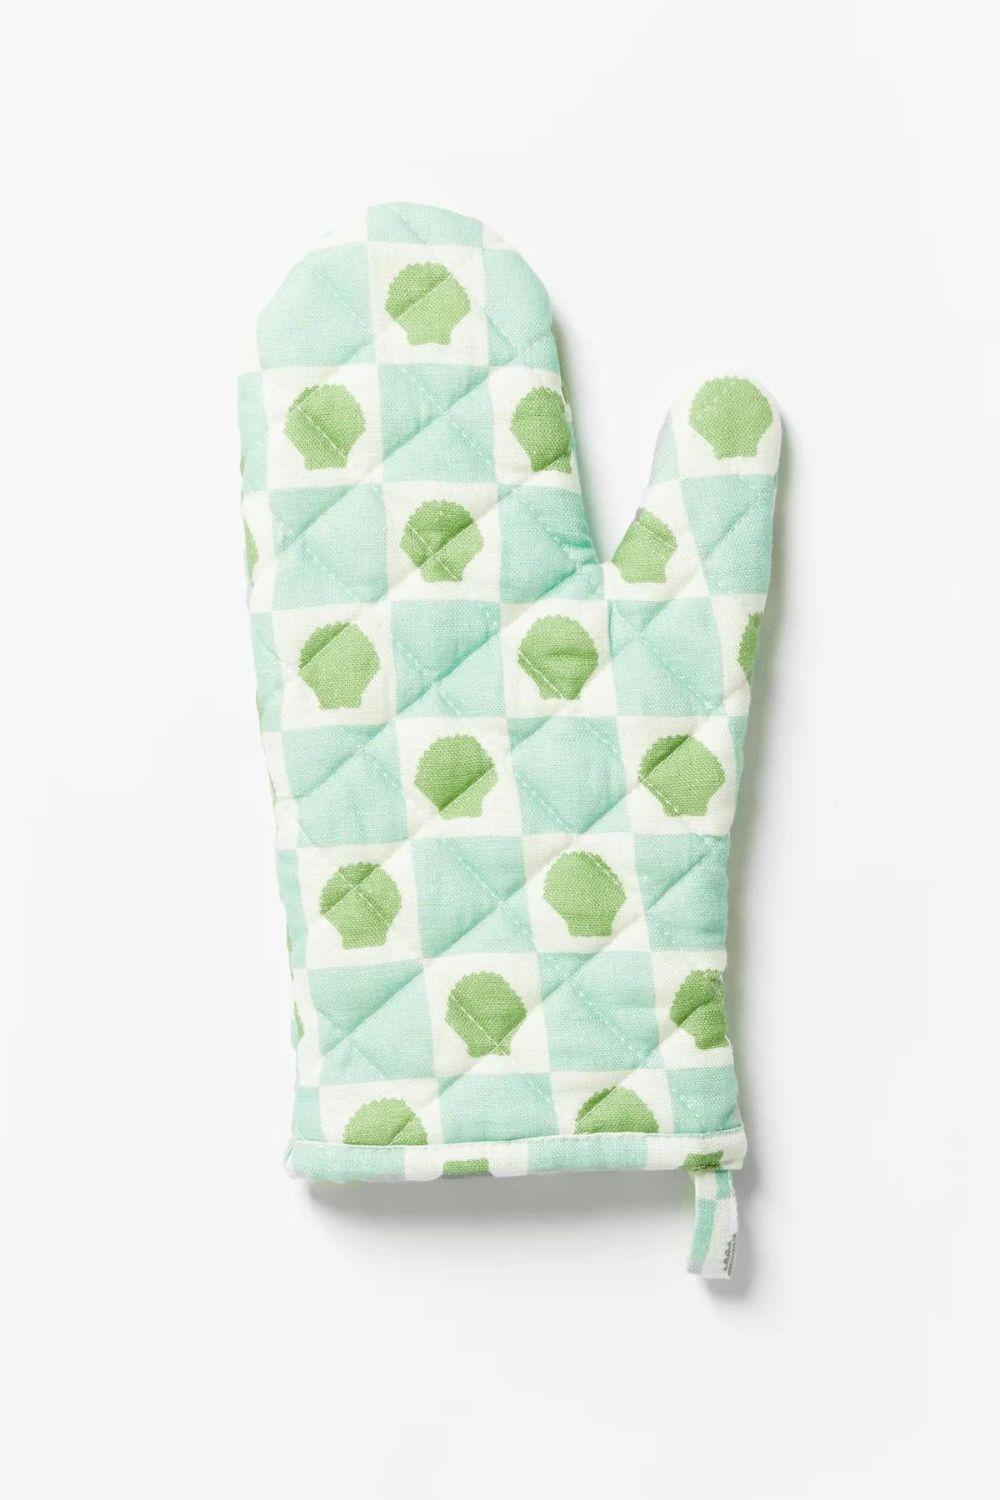 Shell Check Mint Oven Mitts (set of 2)